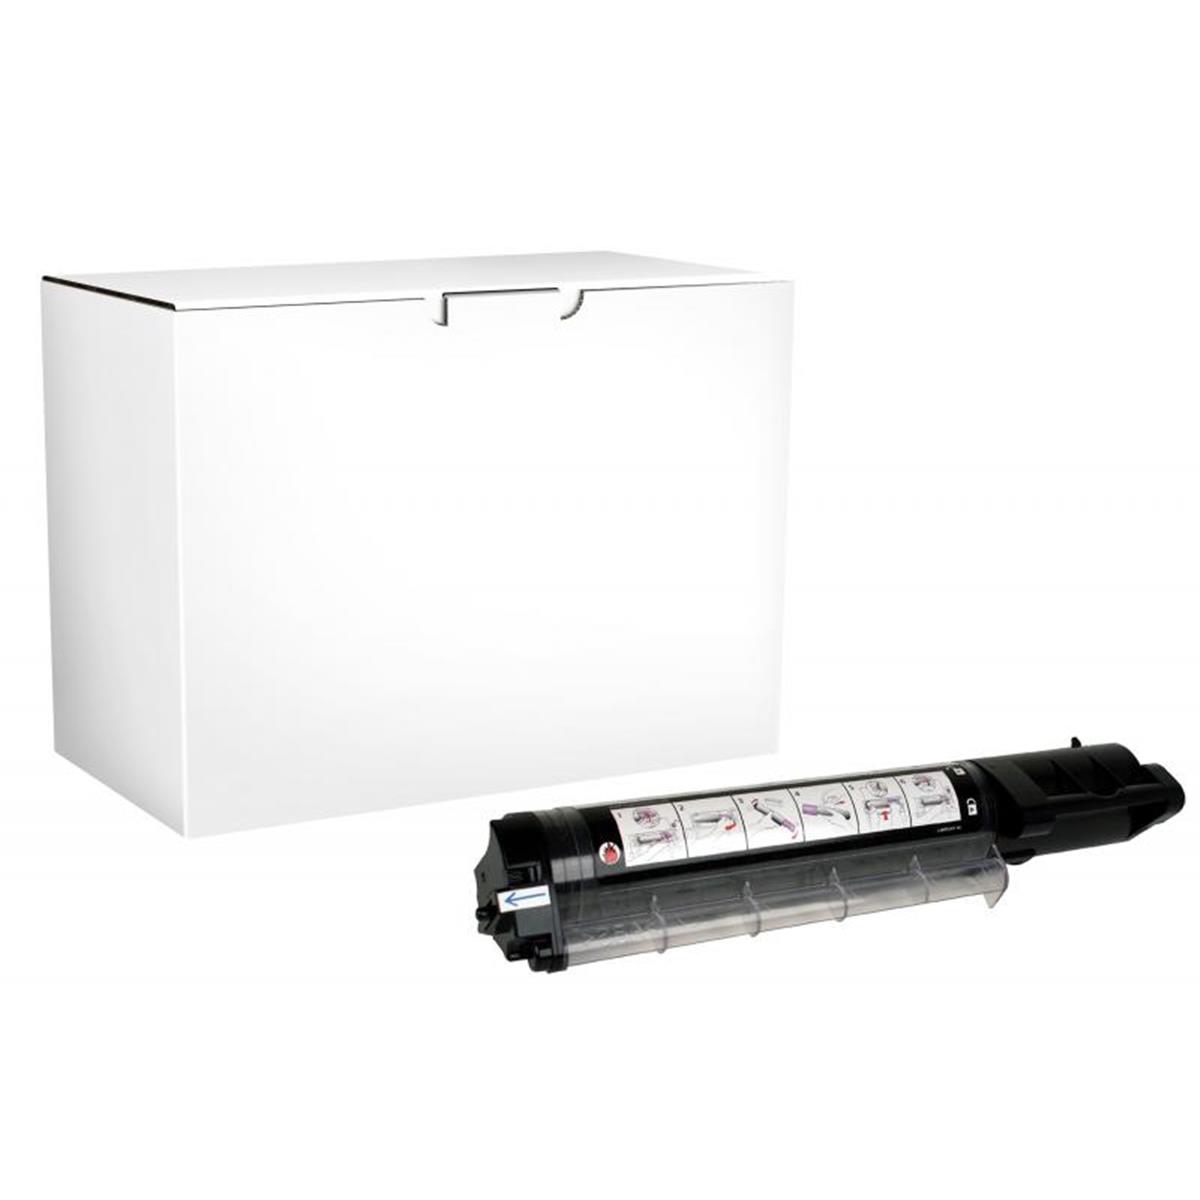 Picture of Dell 200105 High Yield Black Toner Cartridge for Dell 3010